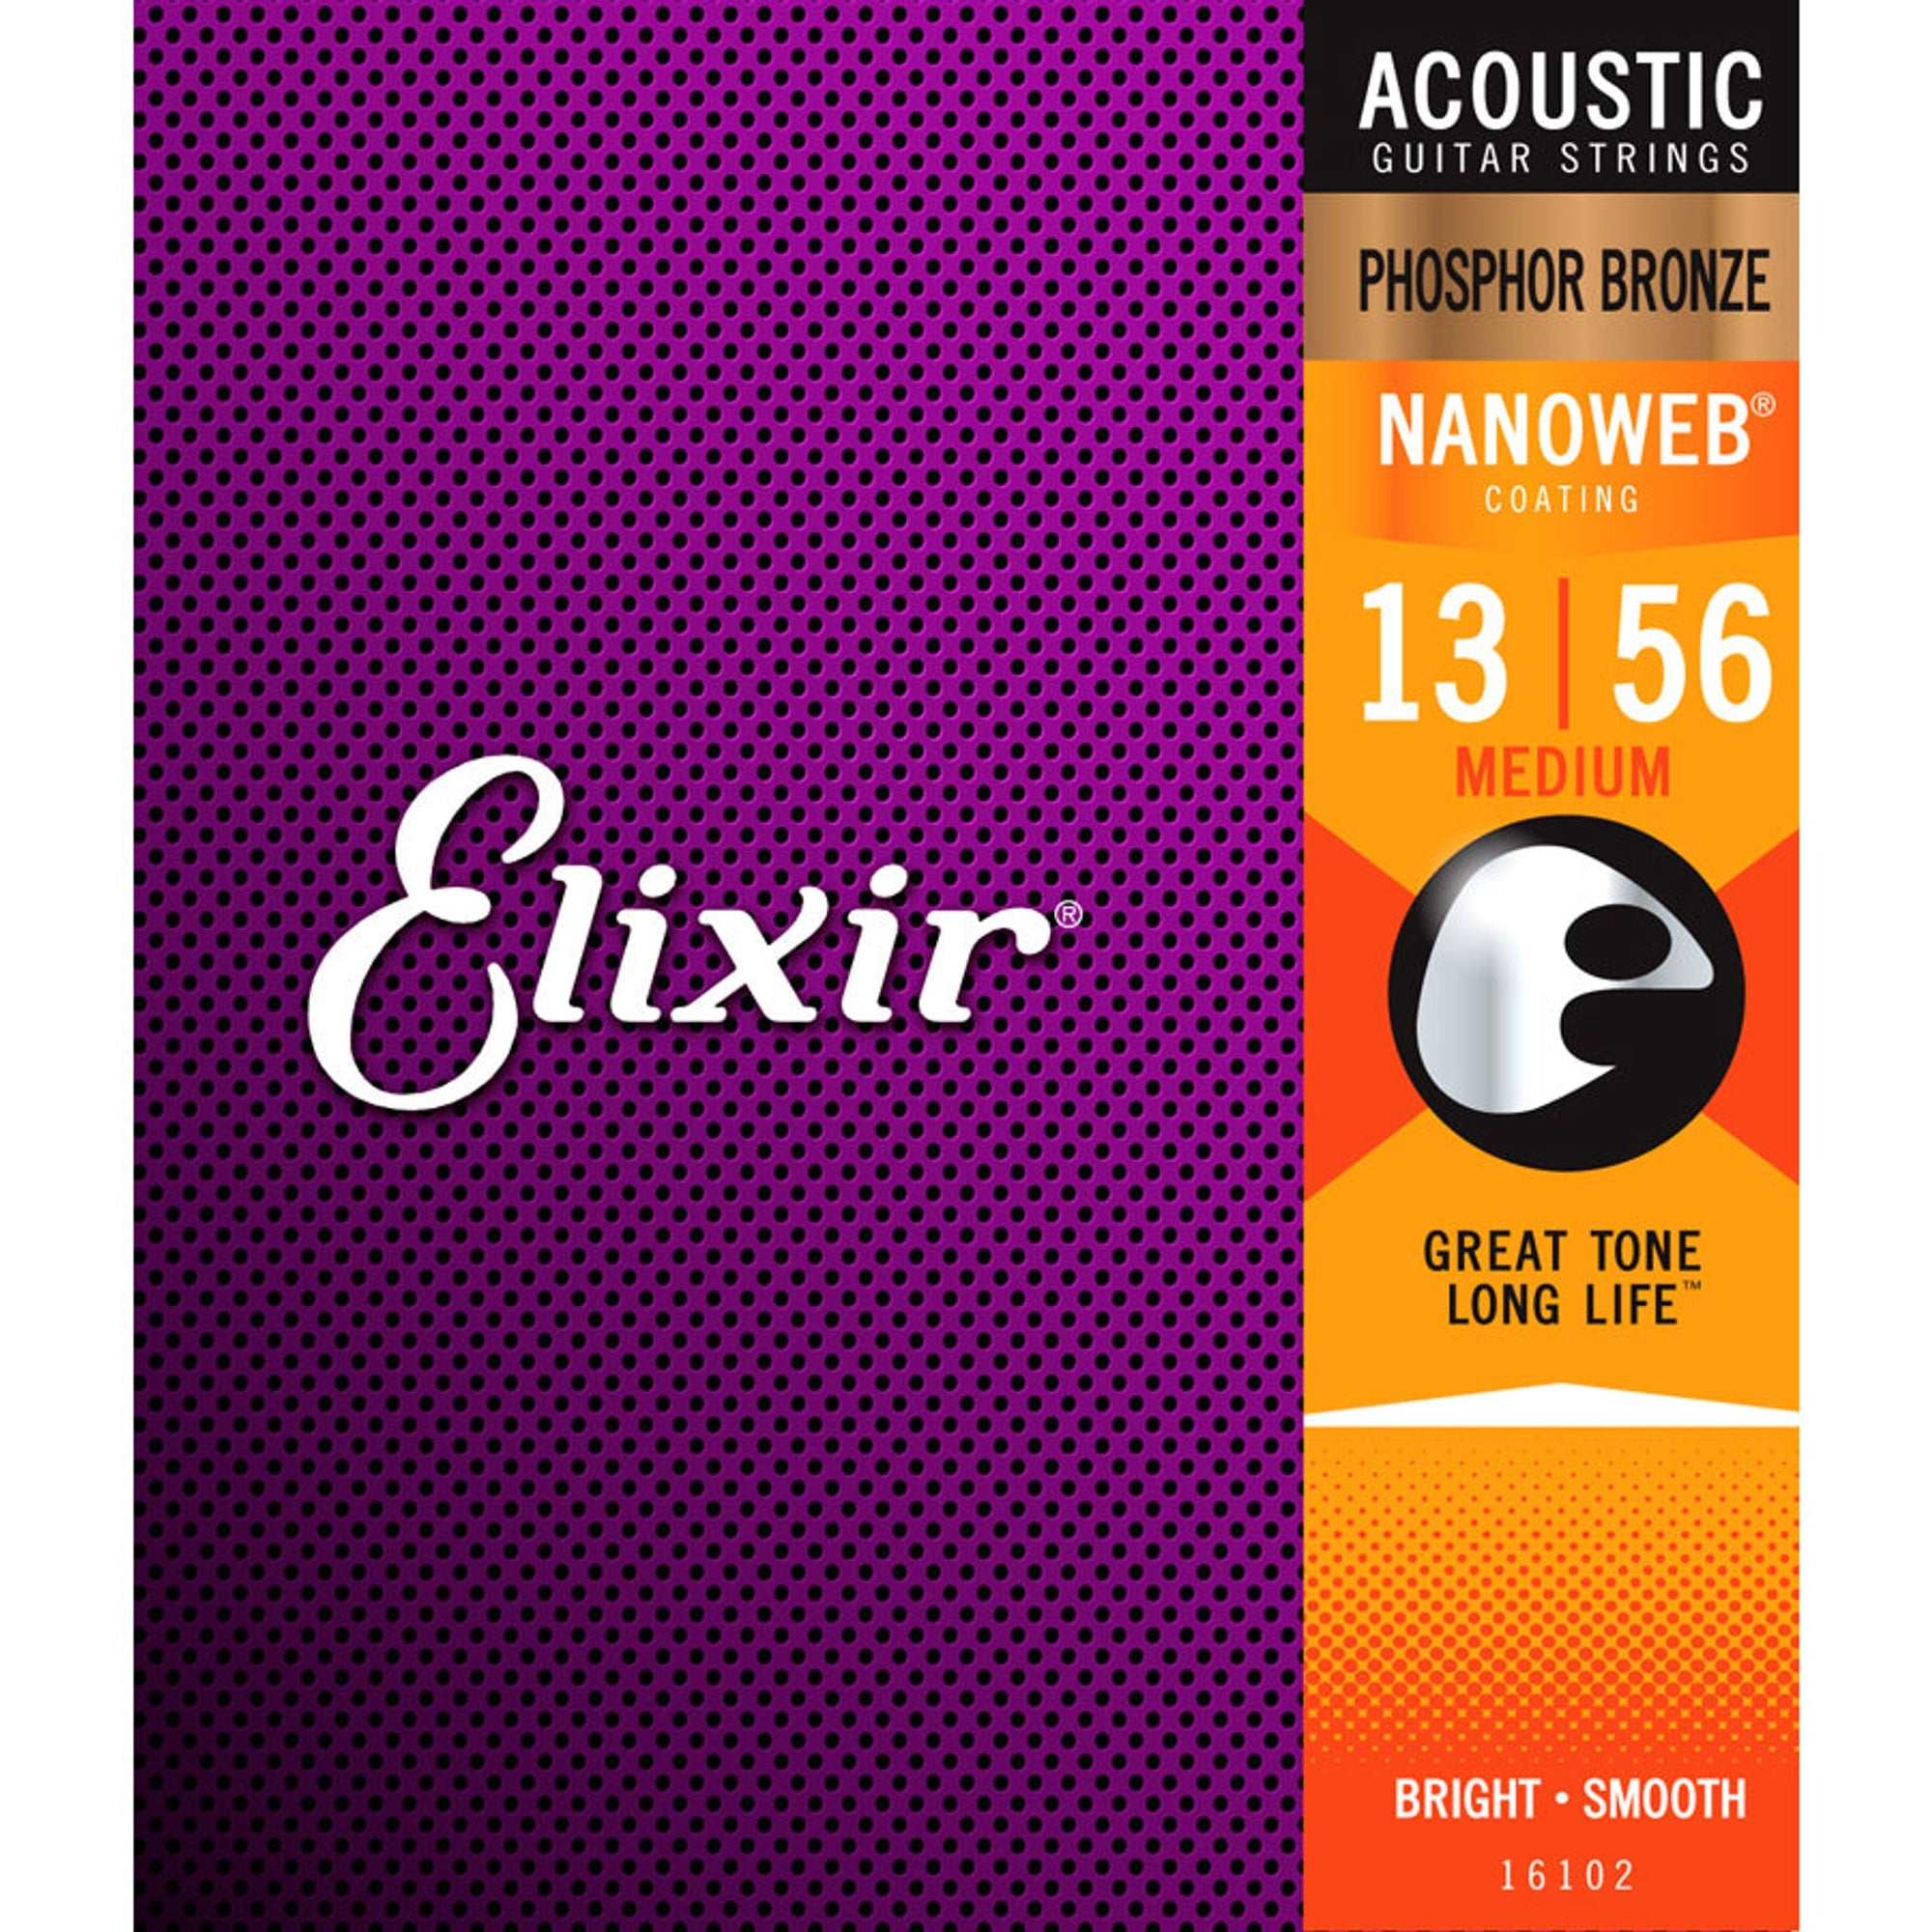 The Elixir 16102 strings are known for their great tone and long life. Elixir strings amp up your guitar’s tone life with the same premium electric guitar strings that experienced players worldwide